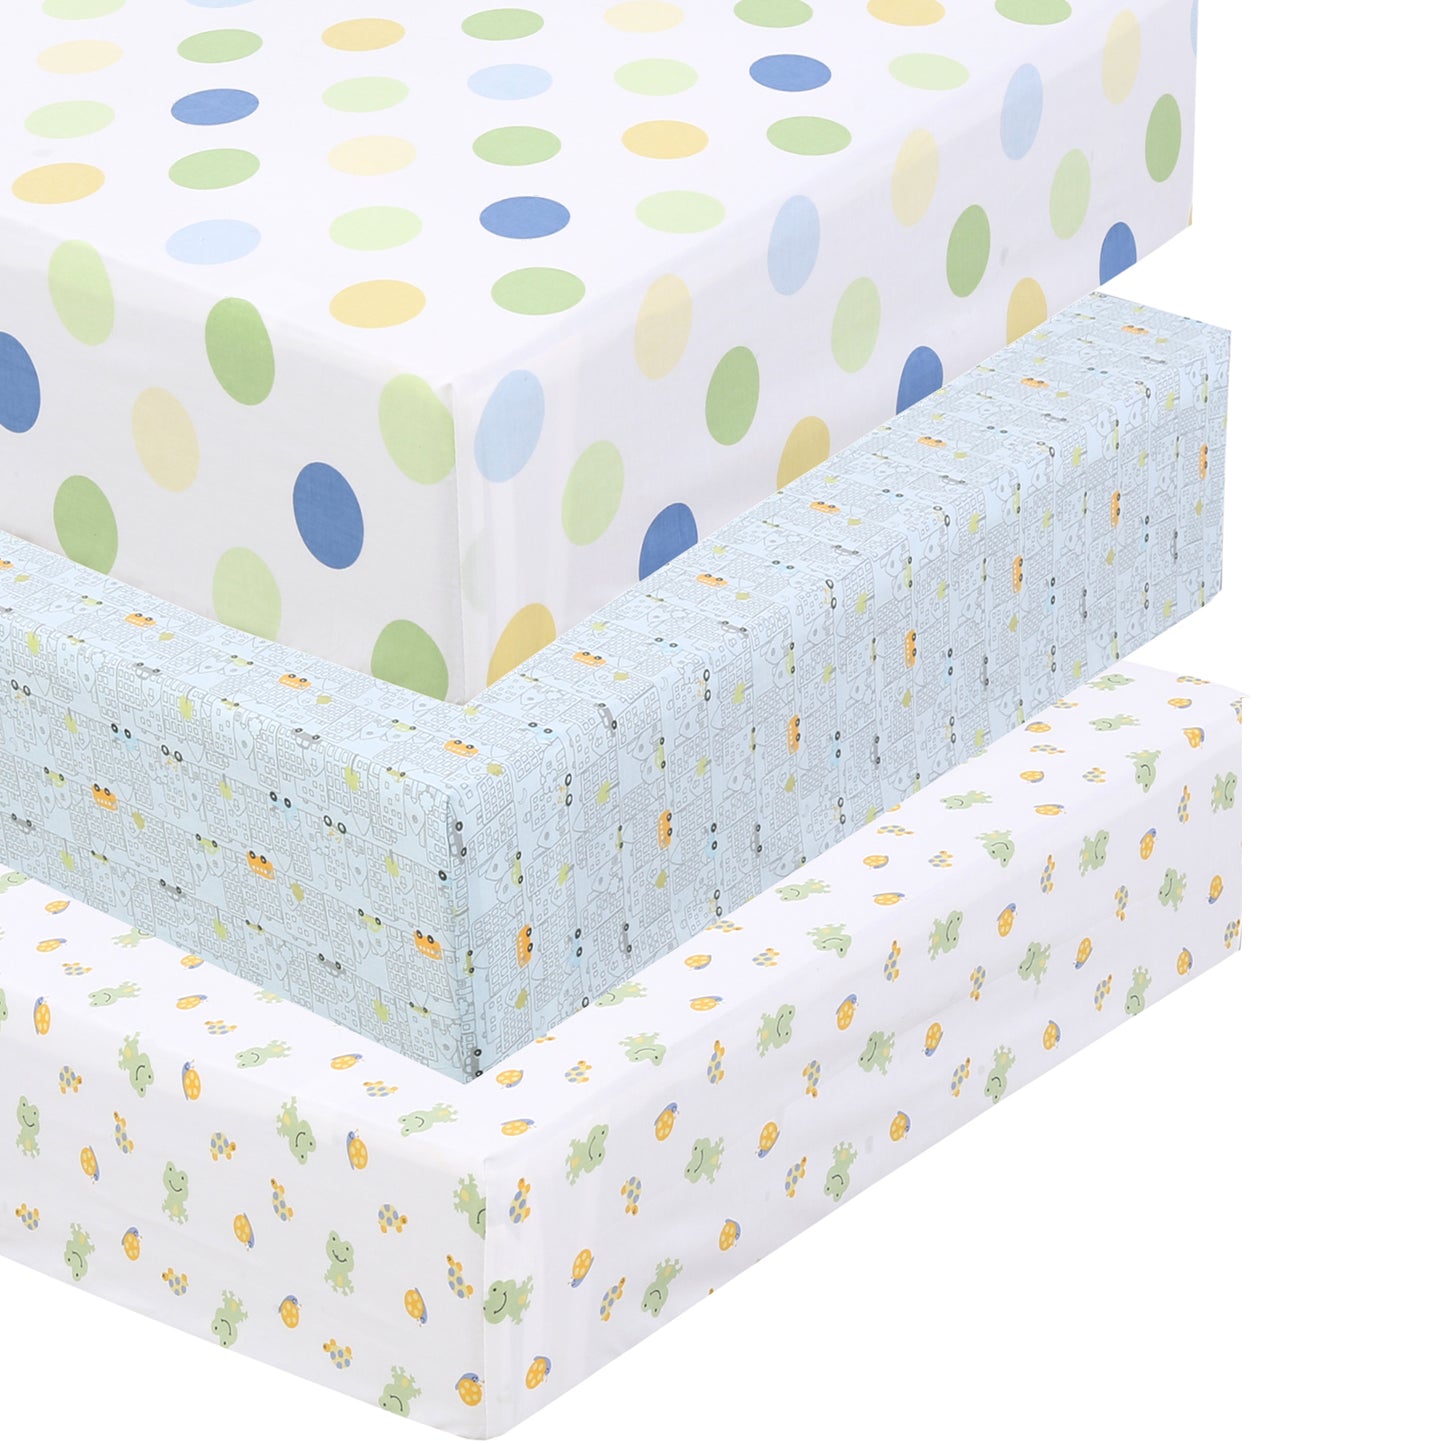 3 Piece Crib/Toddler Cotton Fitted Sheets Blue Green Yellow Polka Dots City Cars & Critters Frog